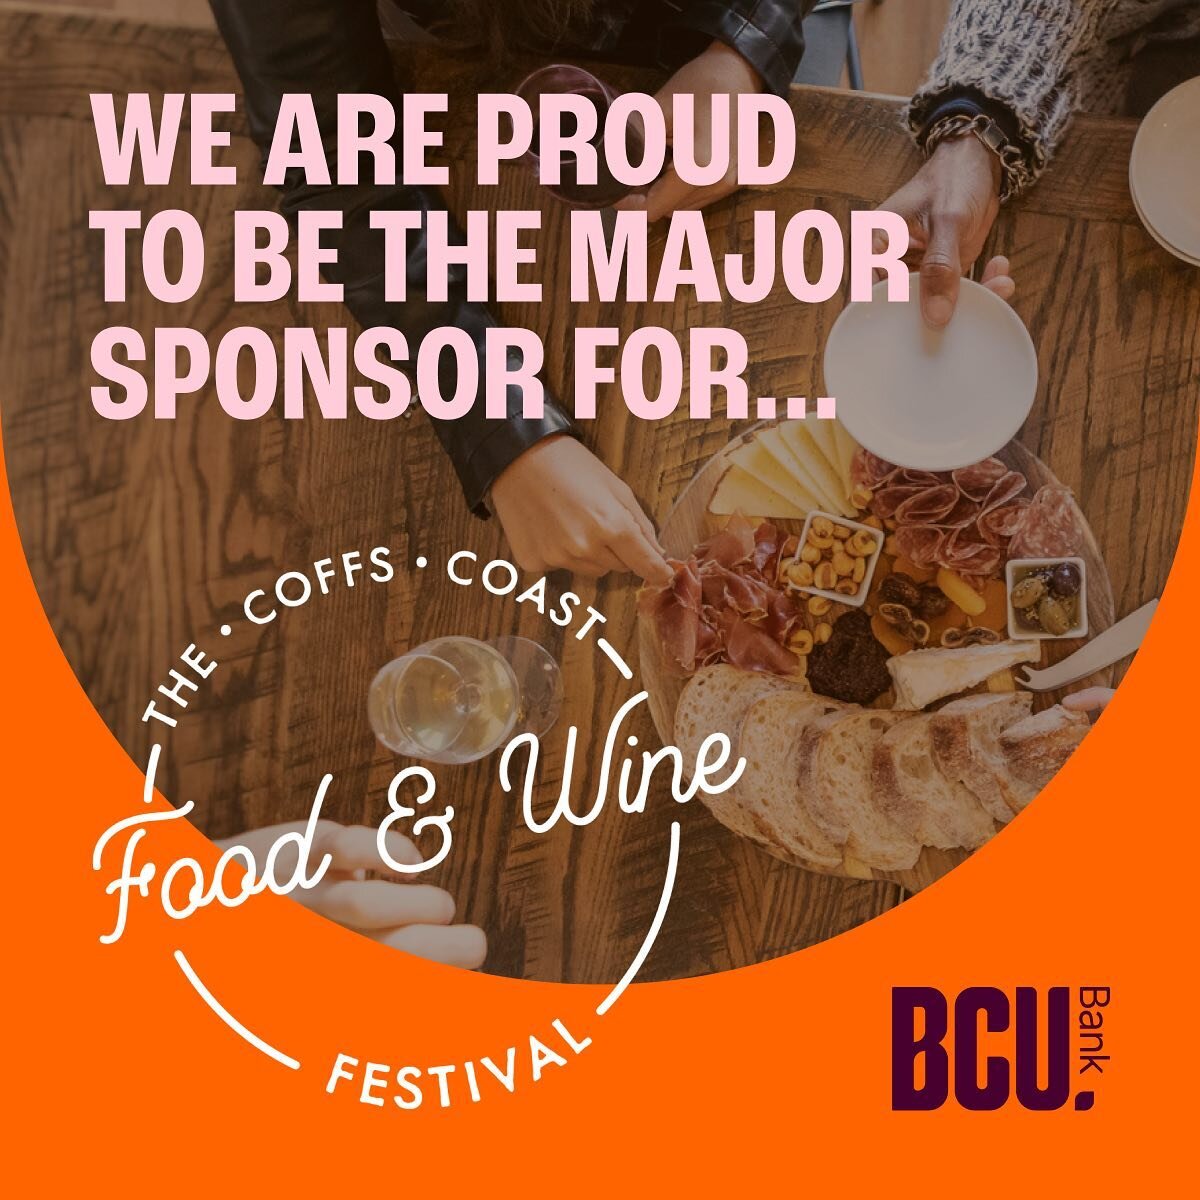 We're proud to announce BCU Bank as the official sponsor of the Coffs Coast Food and Wine Festival. 🎉 

This event is a celebration of the amazing culinary and cultural diversity of our region, and we're excited to support local businesses and our c